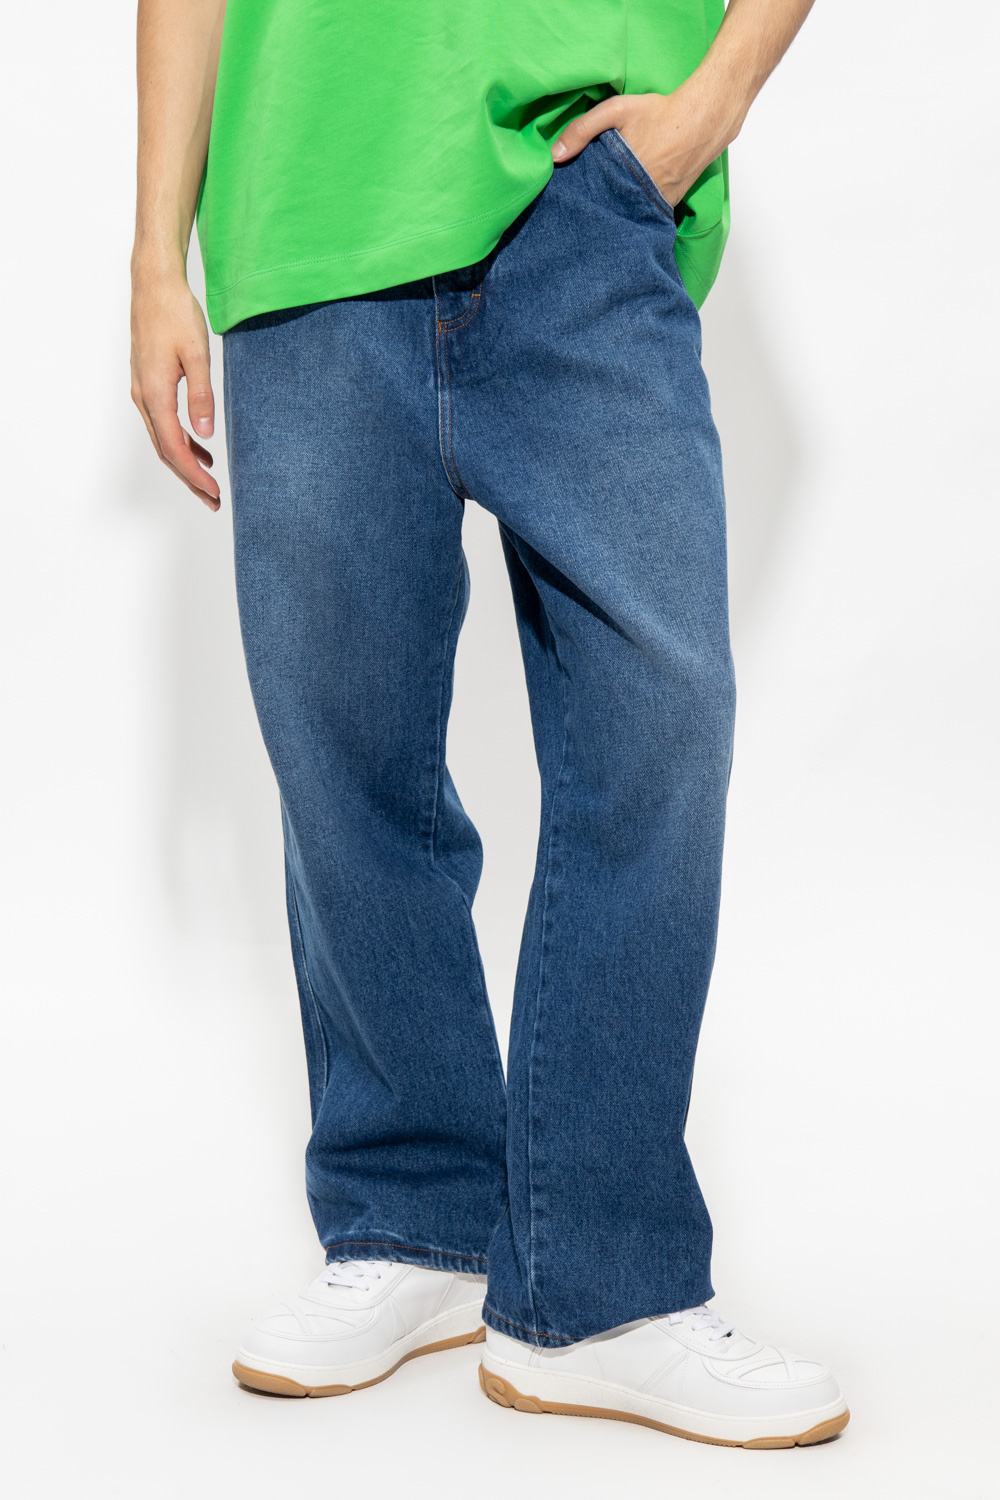 Ami Alexandre Mattiussi Jeans with dropped crotch